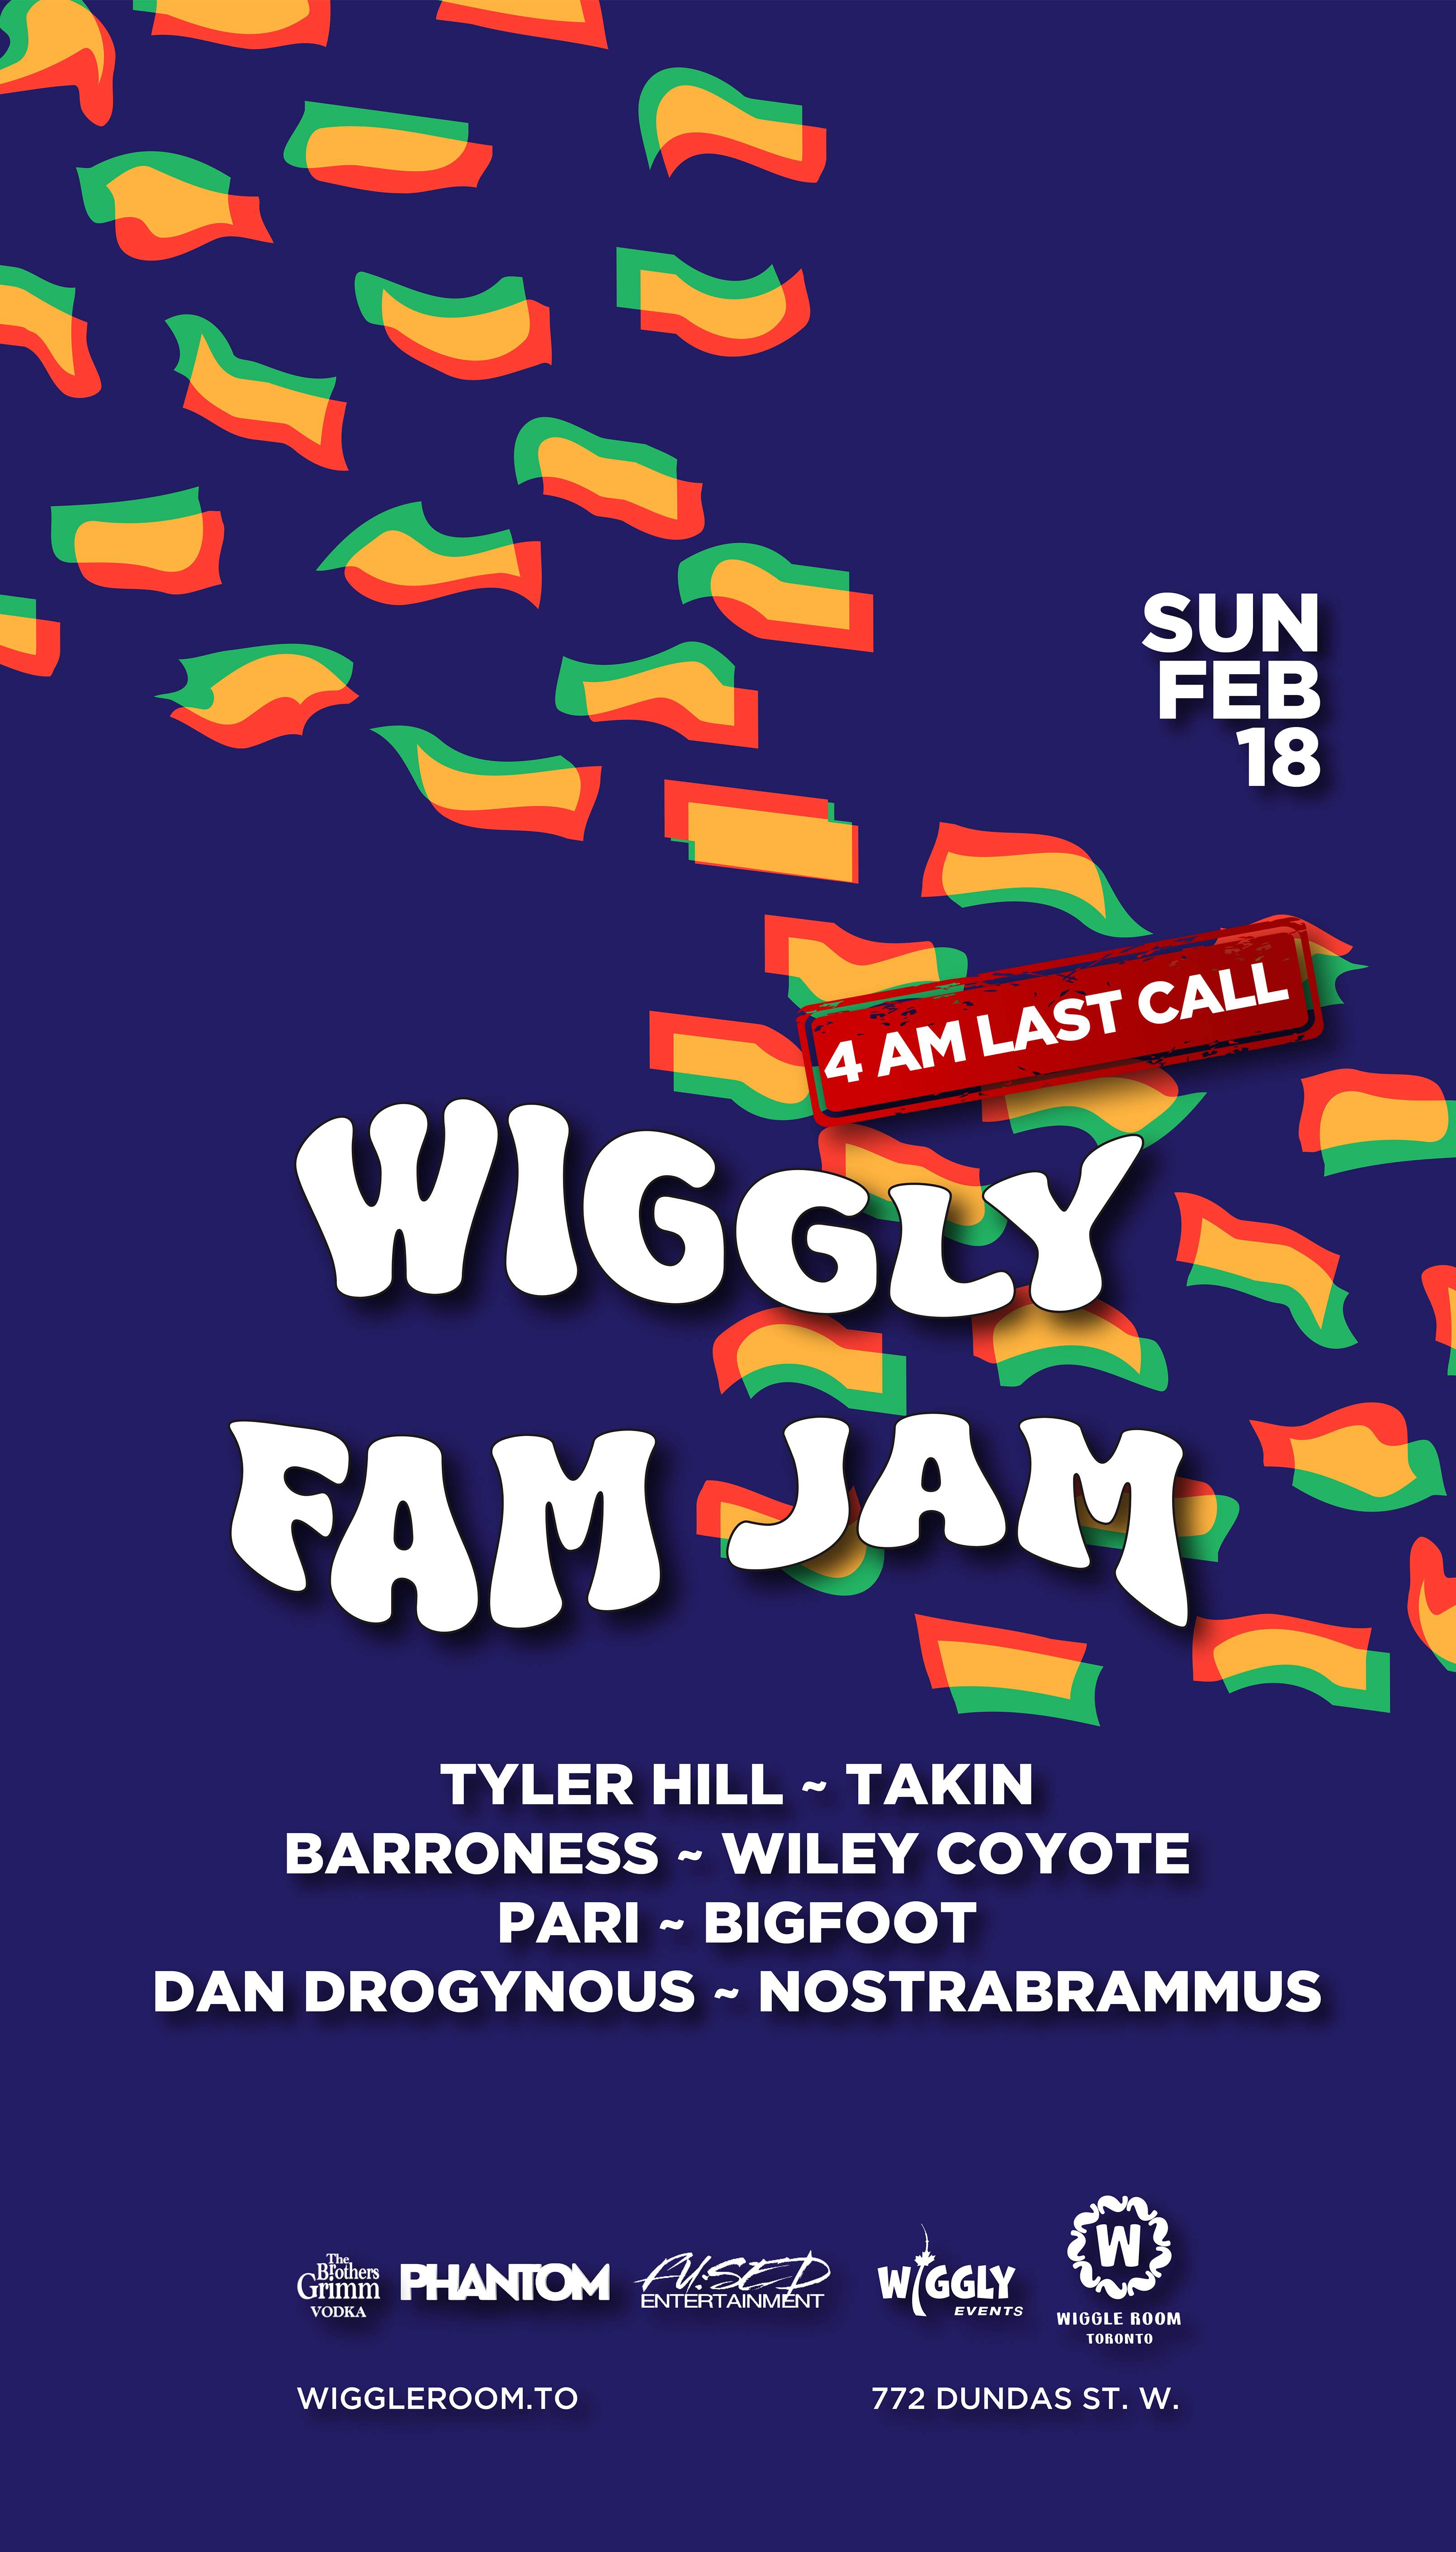 WiGGLY Events' Annual Fam Jam  +4AM LAST CALL - フライヤー裏